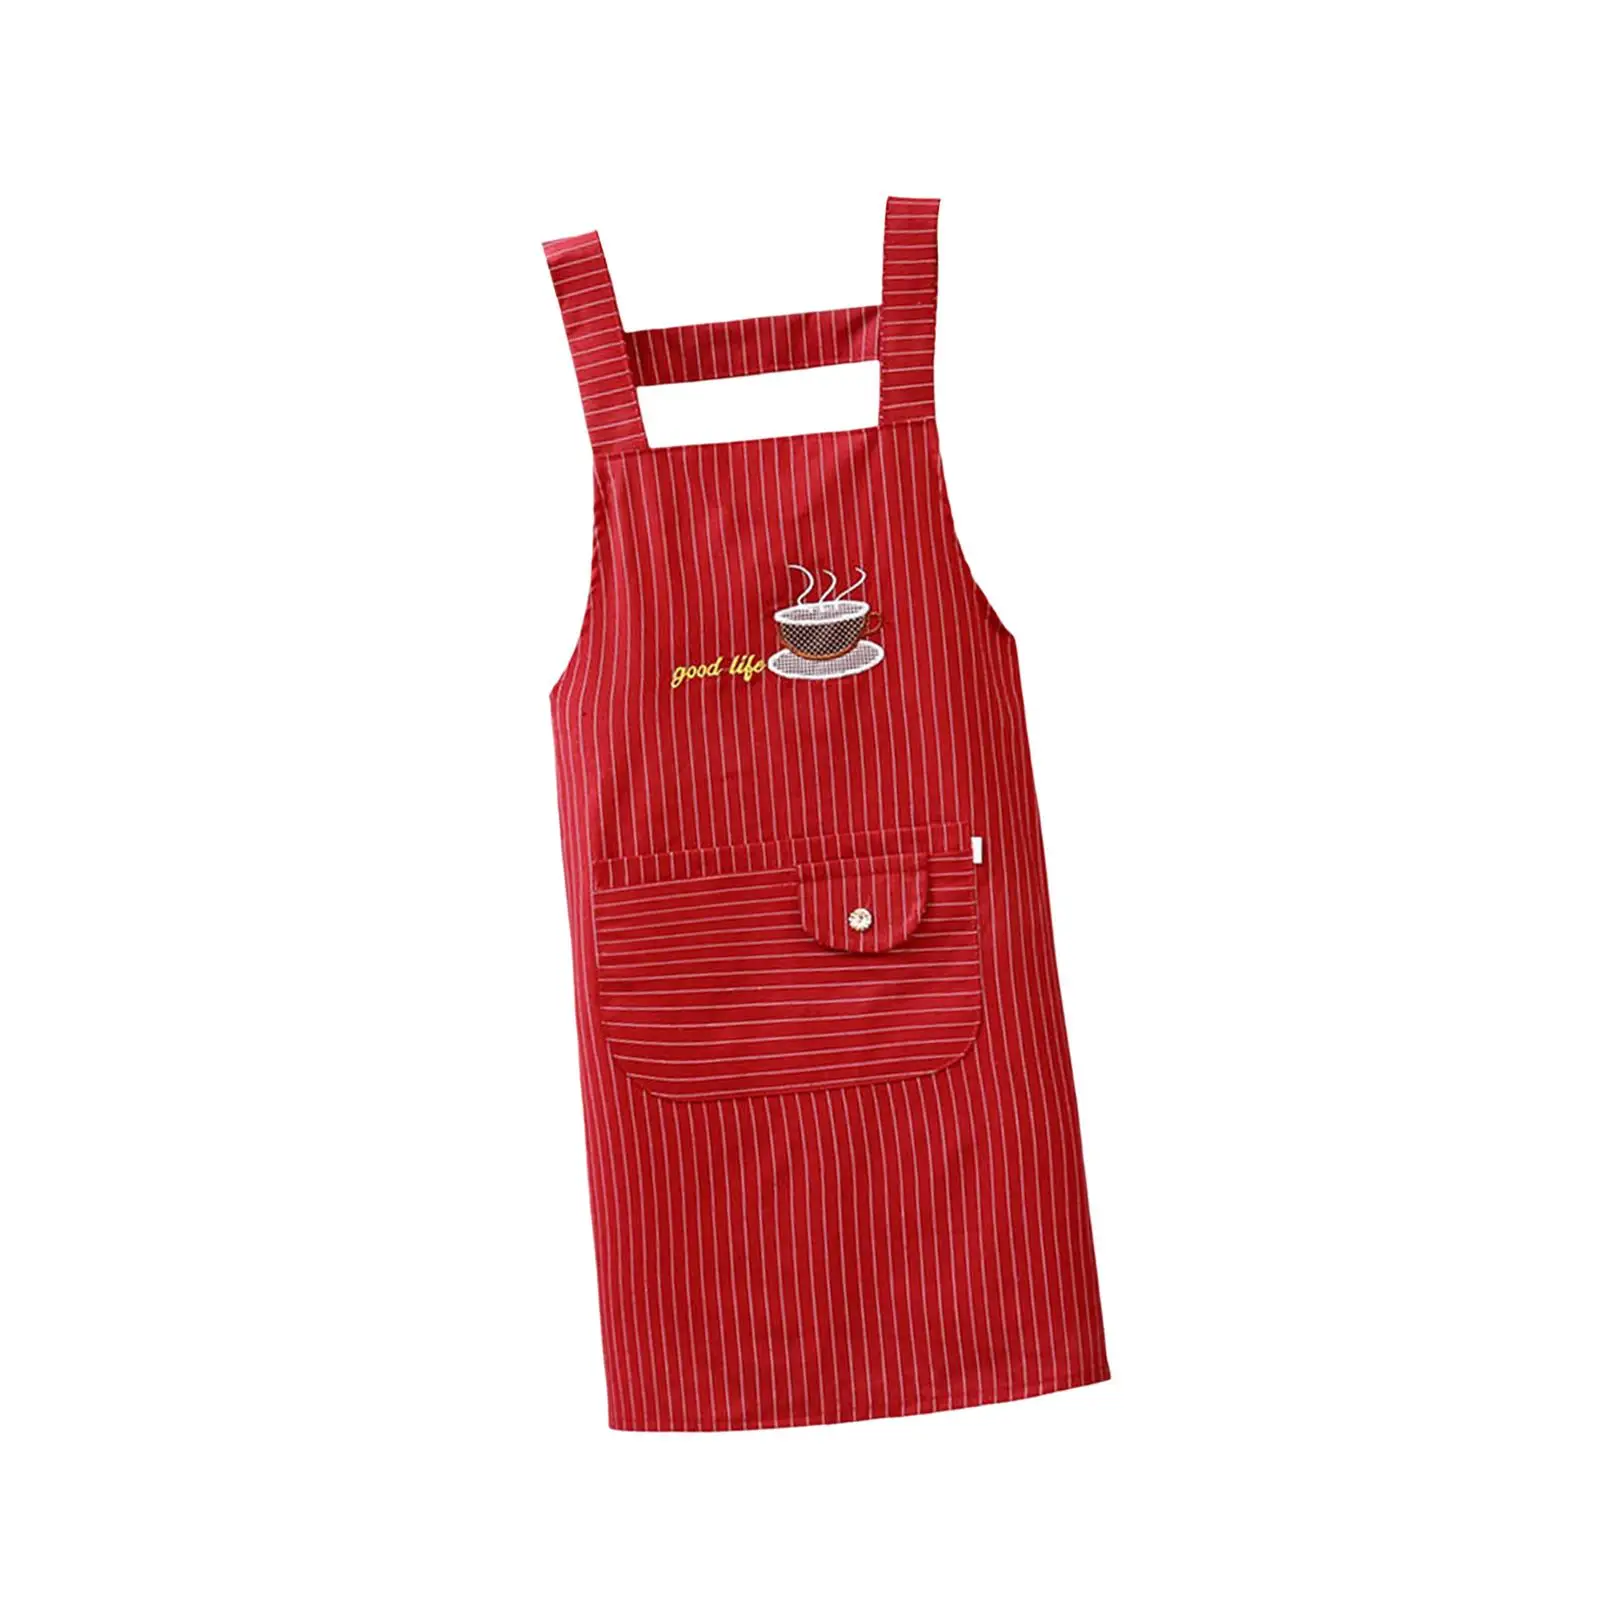 Kitchen Cooking Aprons Soft Professional with Pockets Oil Resistant Adjustable Kitchen Bib Chef Apron for Men Women Unisex Chef